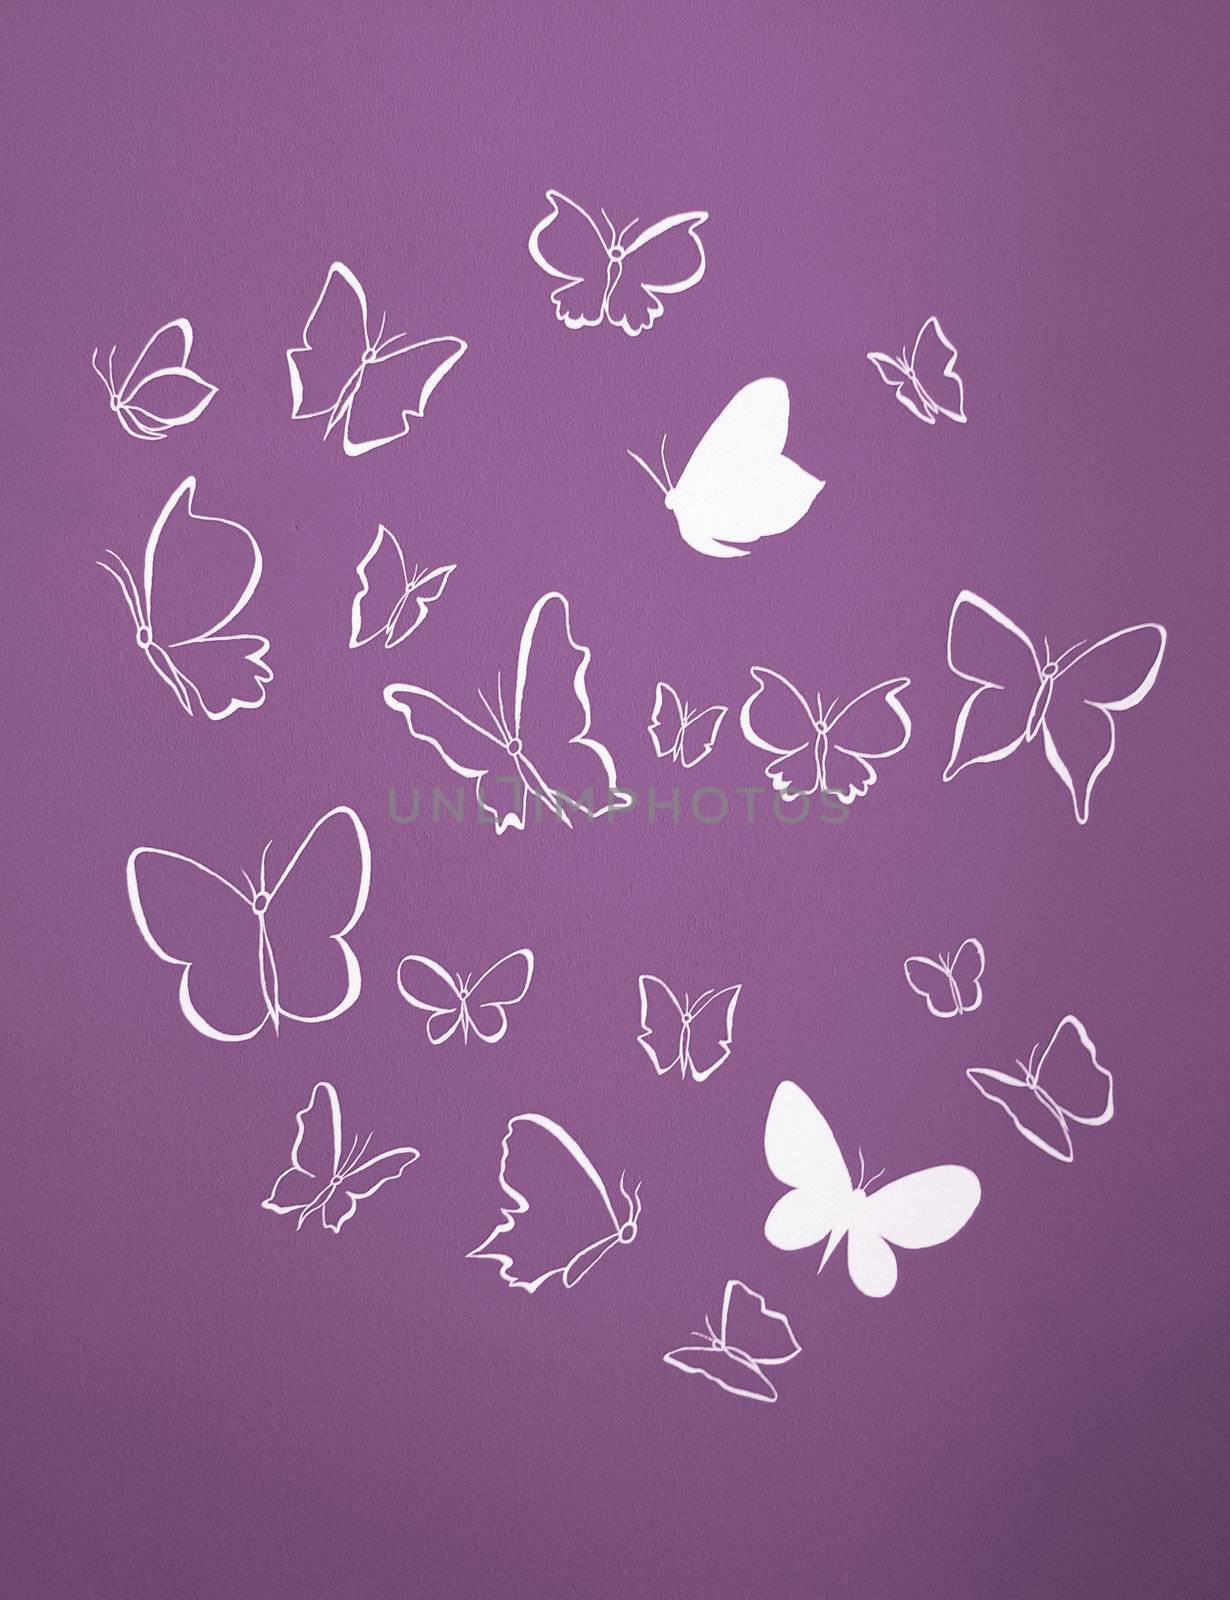 Background of white silhouettes butterflies flying by doble.d